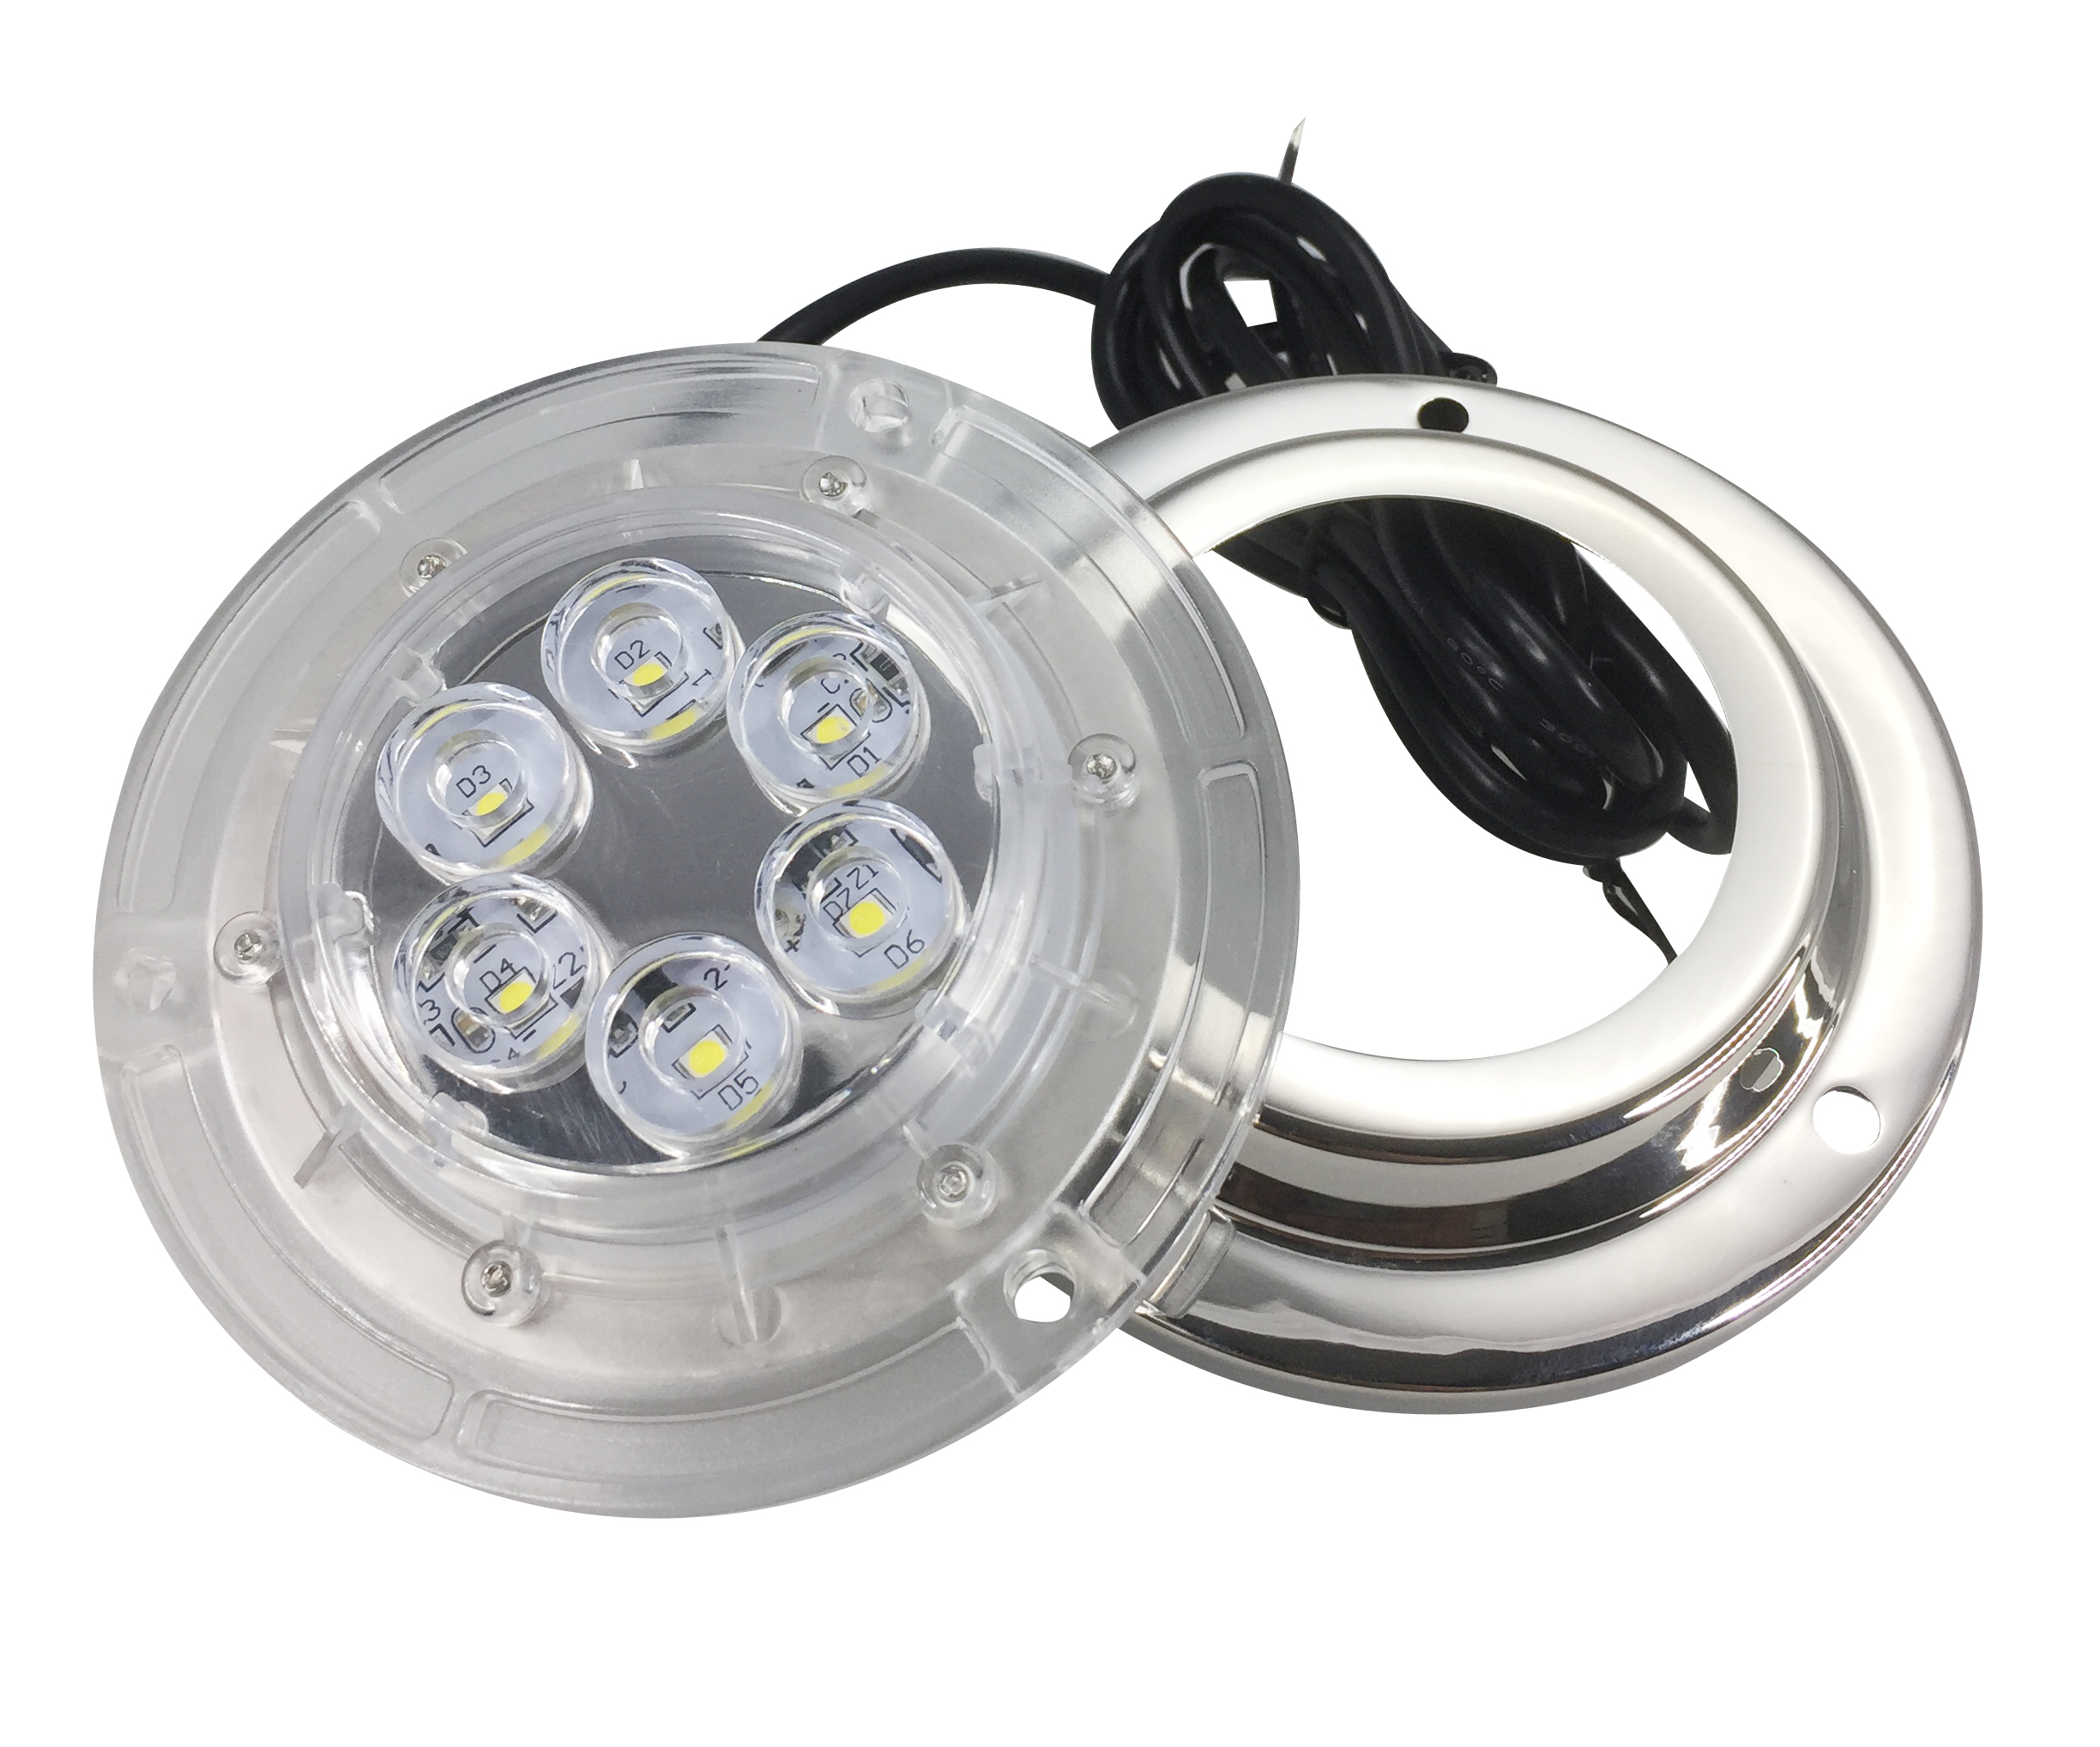 Pactrade Marine Boat SS316 LED White 6 x 2 W Underwater Light 10-30V IP 68 - image 3 of 5